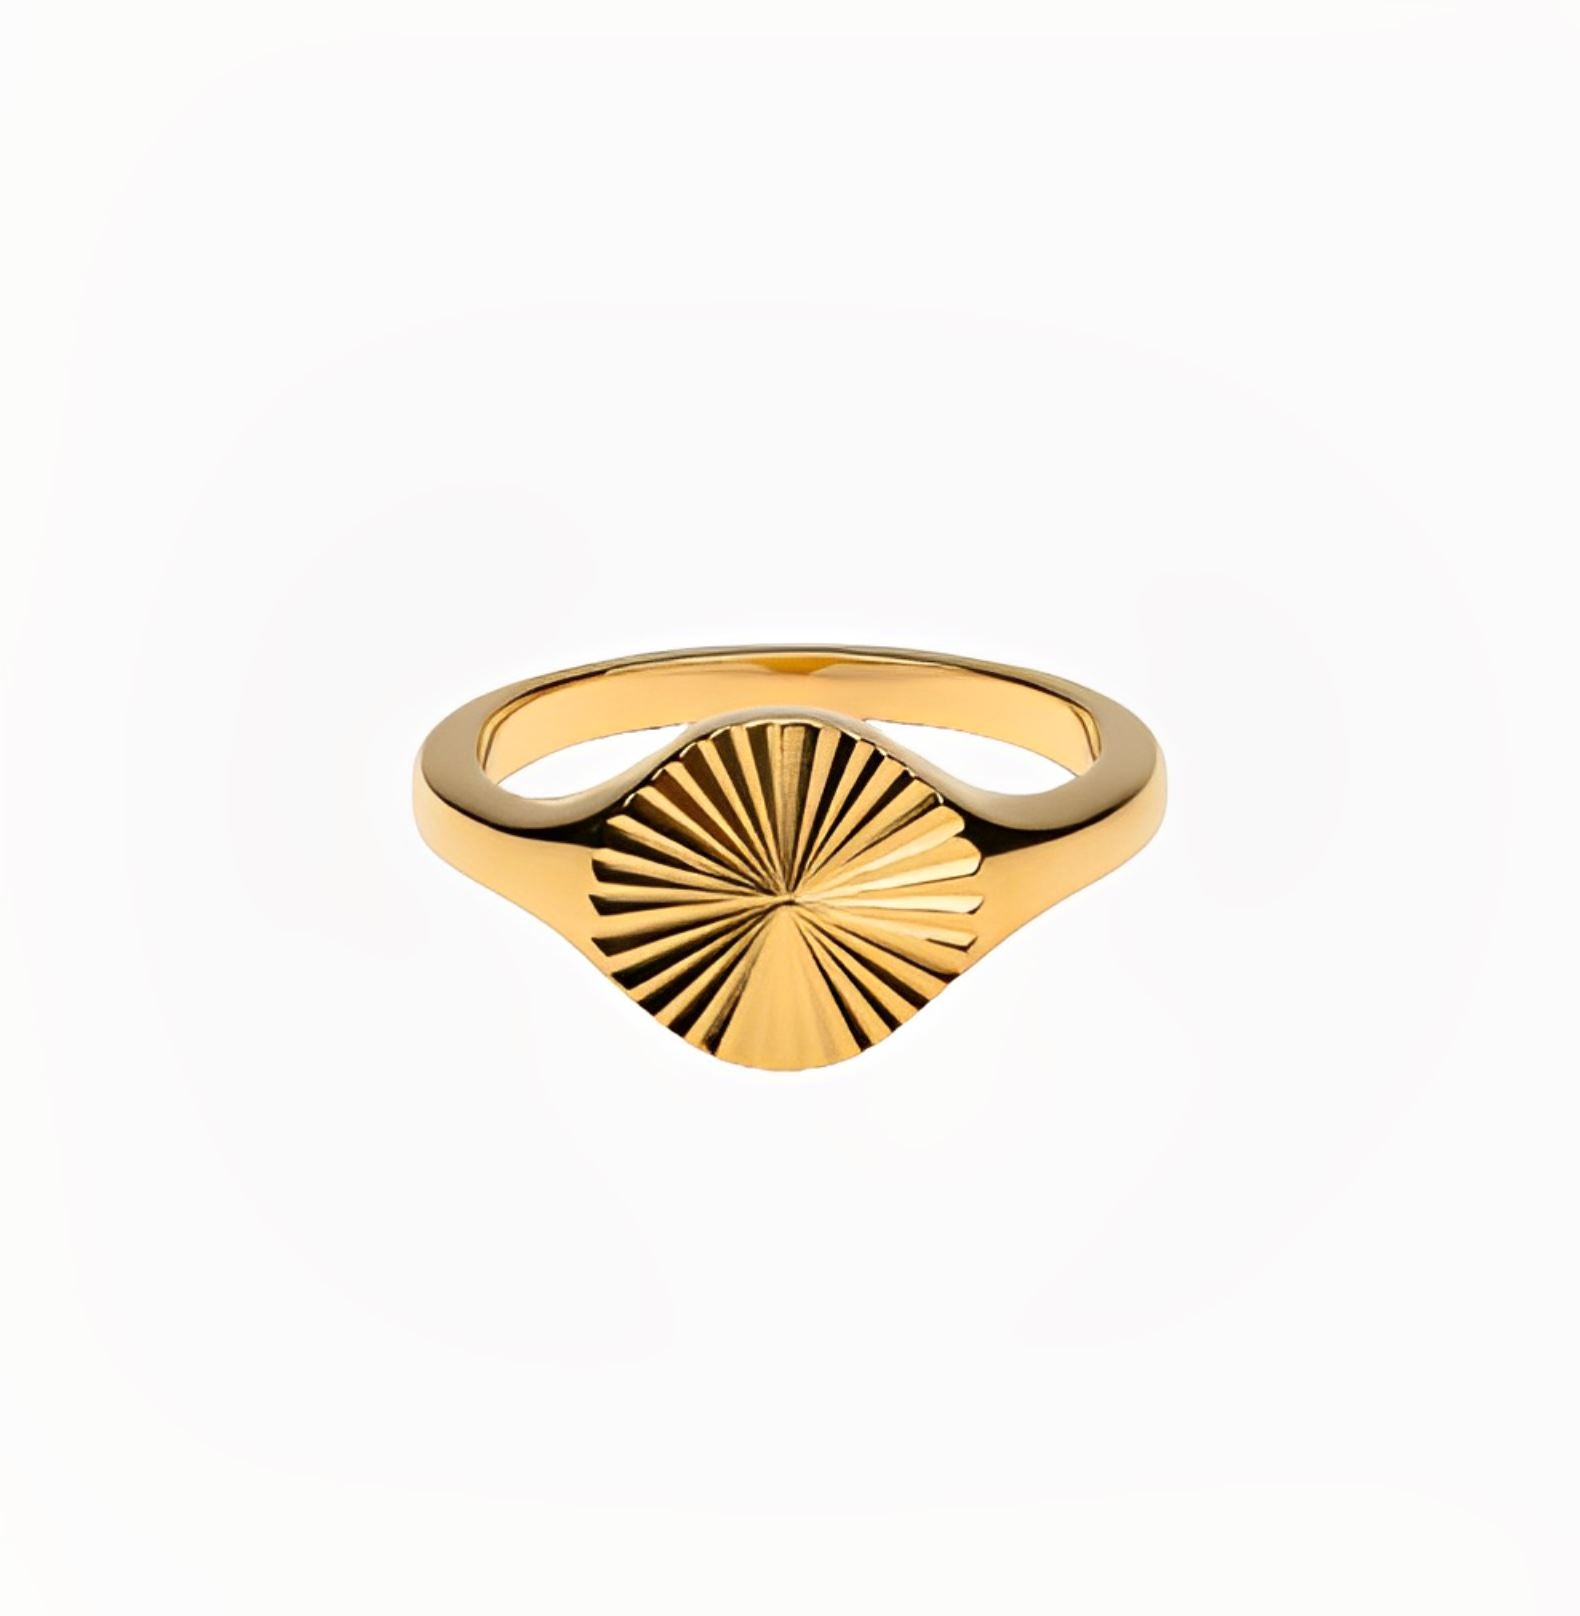 SUN SIGNET RING braclet Yubama Jewelry Online Store - The Elegant Designs of Gold and Silver ! 